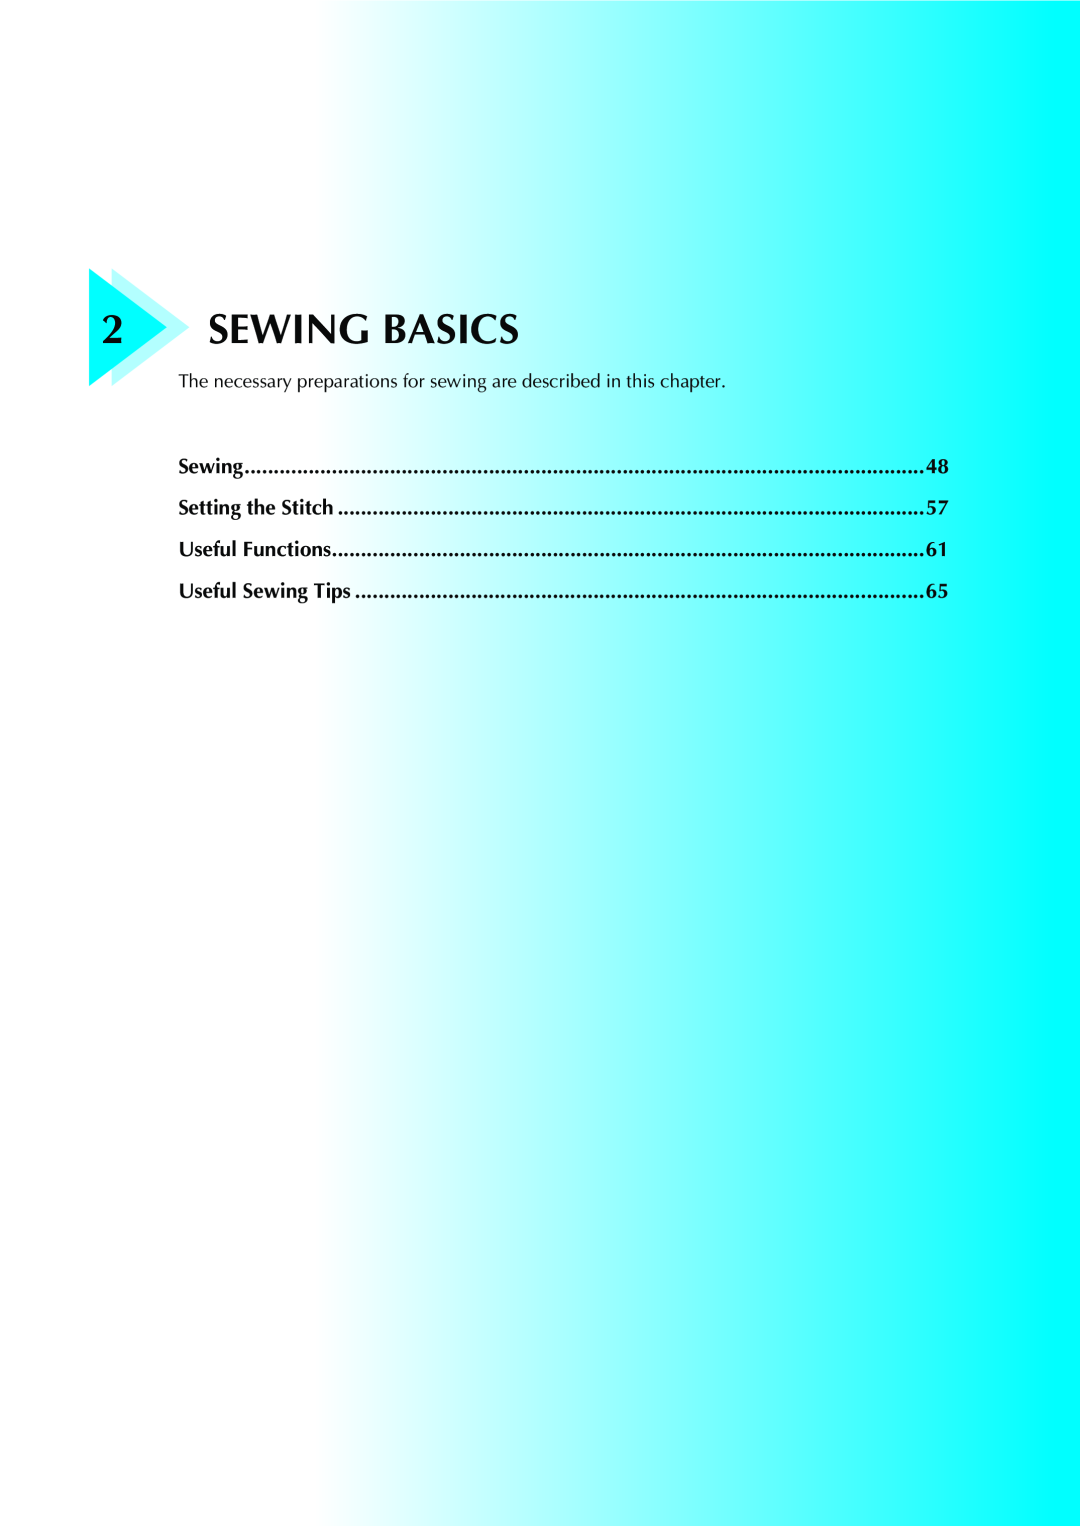 Brother 885-V31 Sewing Basics, The necessary preparations for sewing are described in this chapter, Setting the Stitch 